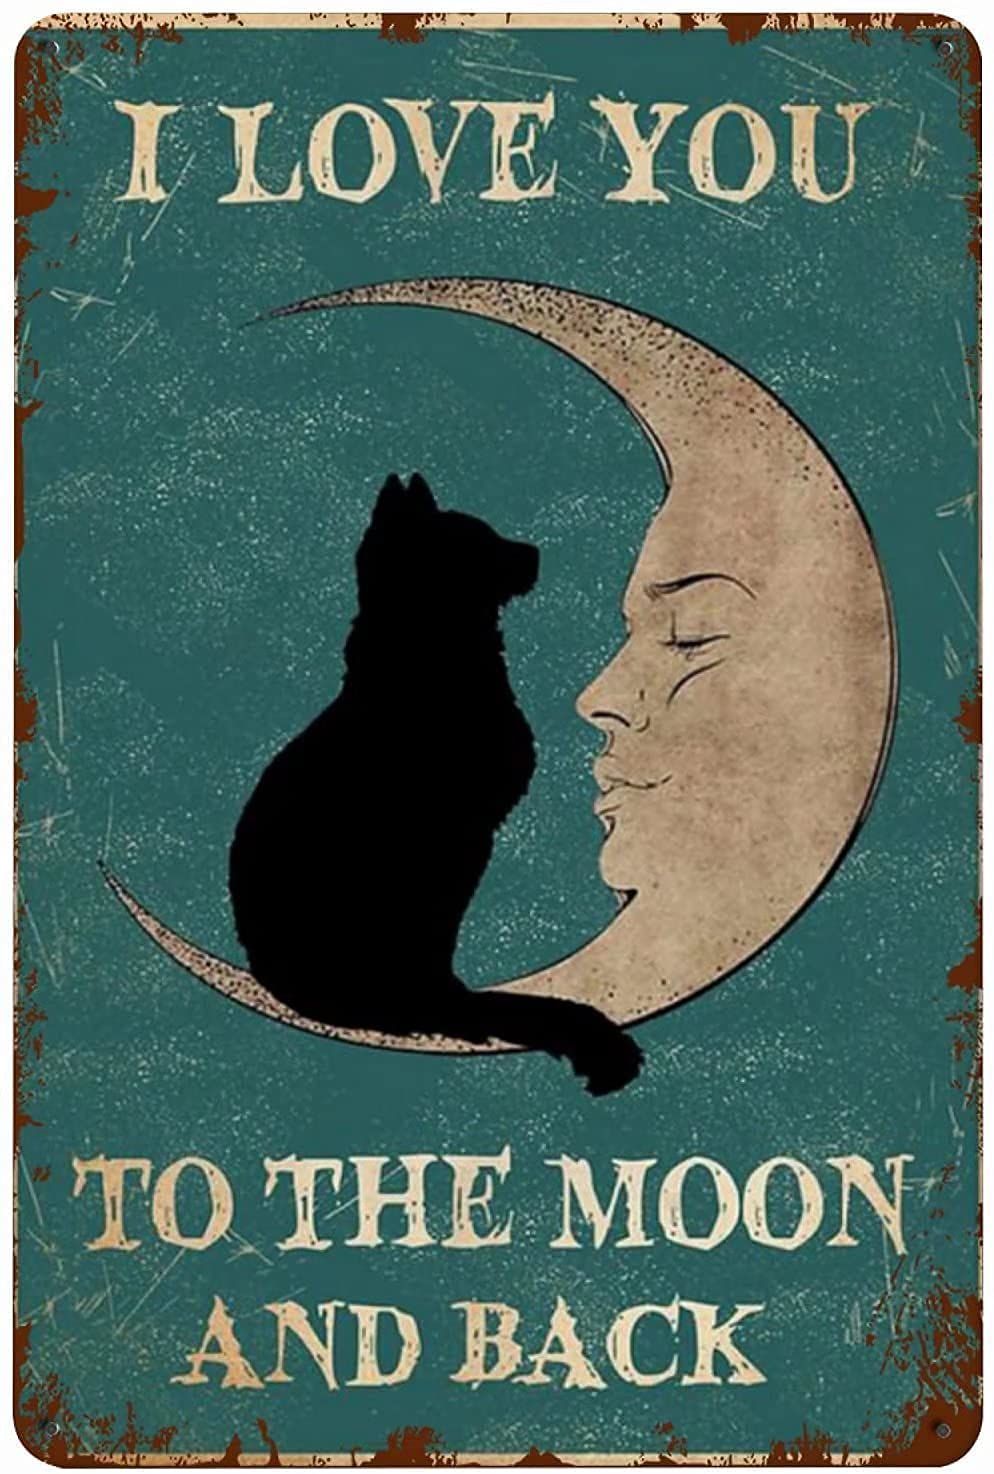 Black Cat Moon Metal Tin Sign,I Love You to The Moon and Back,Super Durable Bathroom Retro Plaqu ...